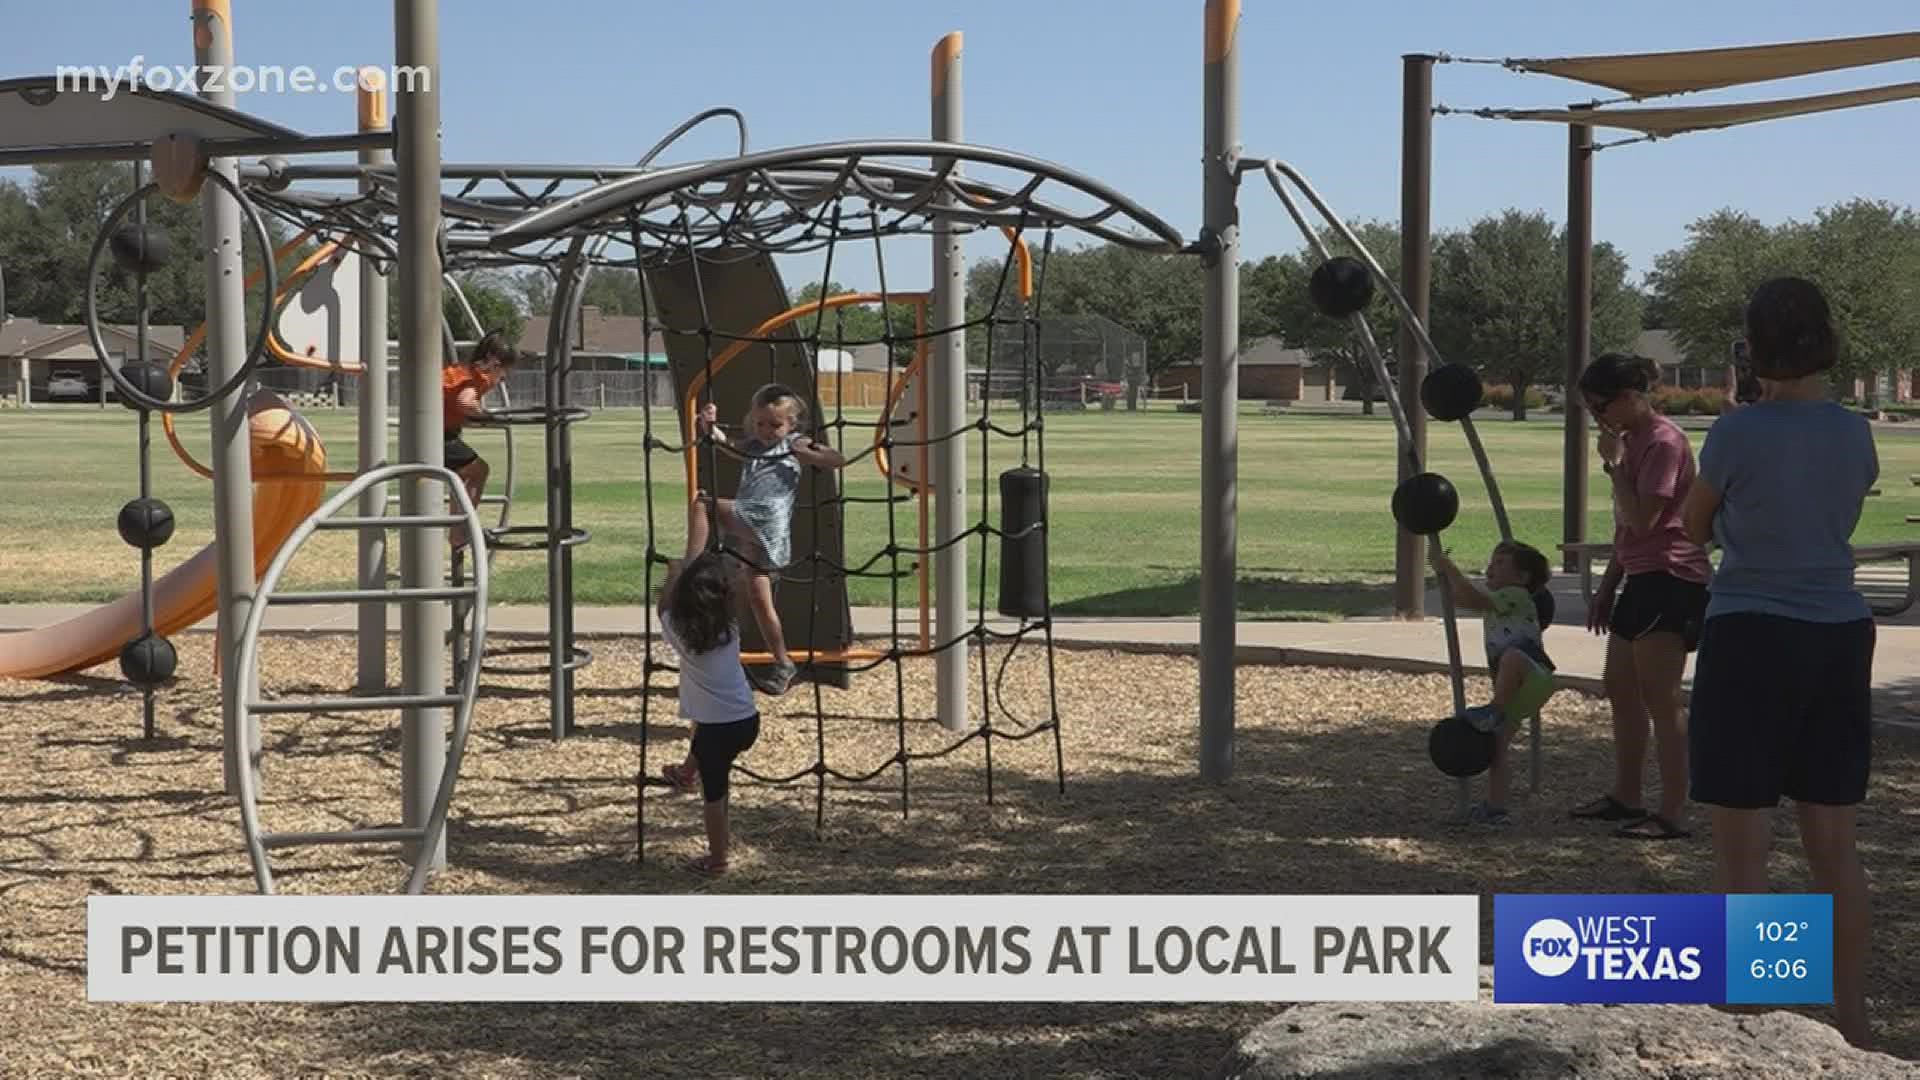 The San Angelo parent who created the petition believes a restroom would enhance the popularity of the park even more.